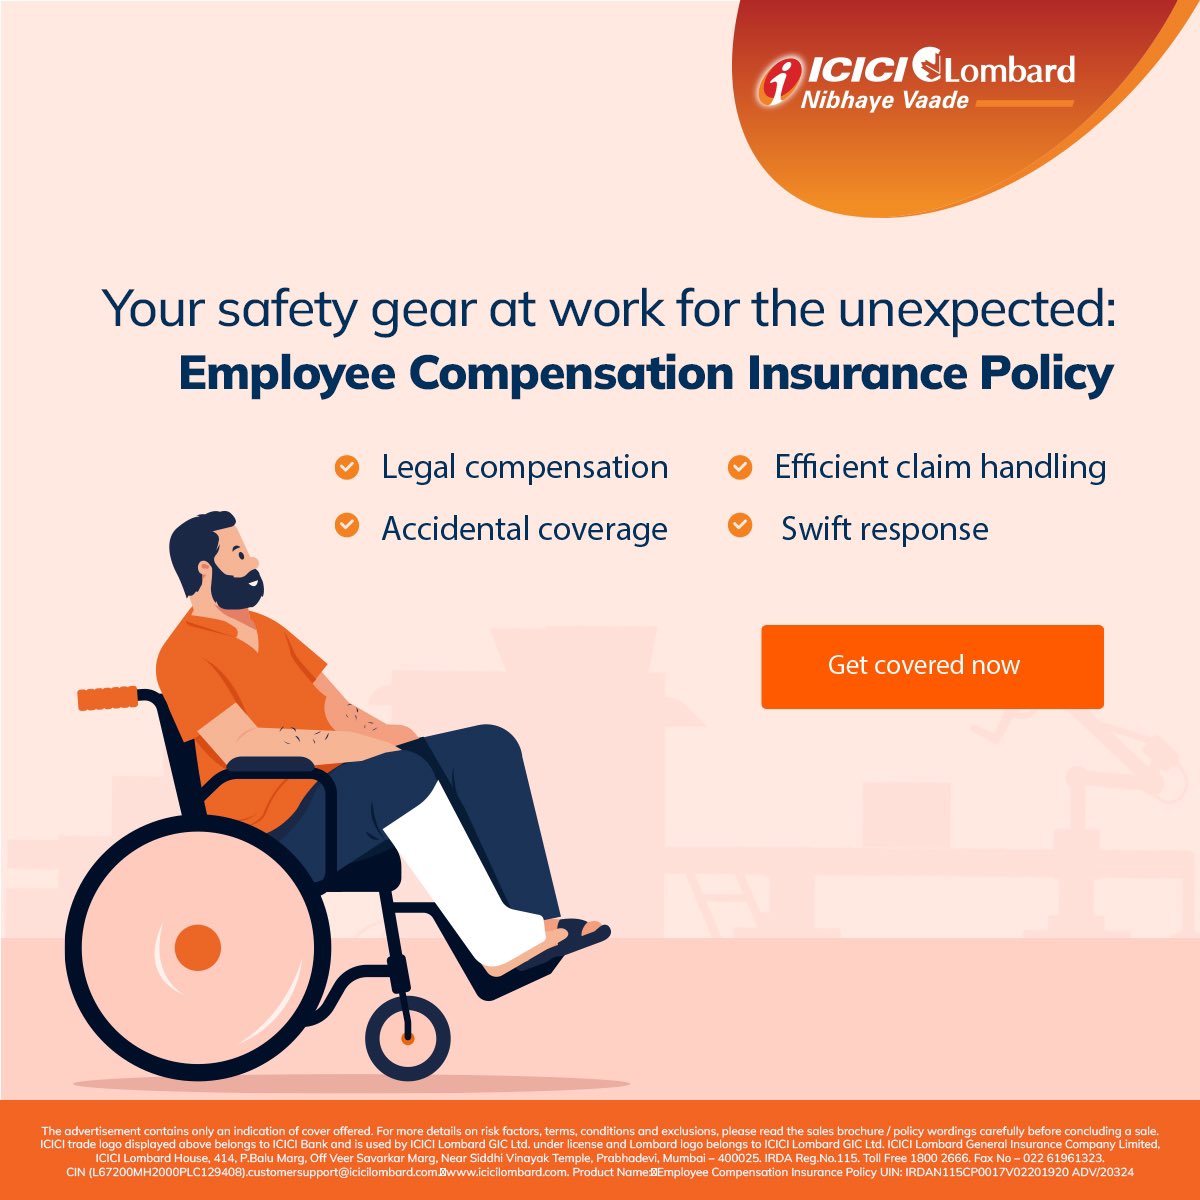 Stay protected on the job with our Employee's Compensation Insurance Policy. From legal compensation to efficient claim handling, we've got you covered for the unexpected. Get covered now: sme.icicilombard.com